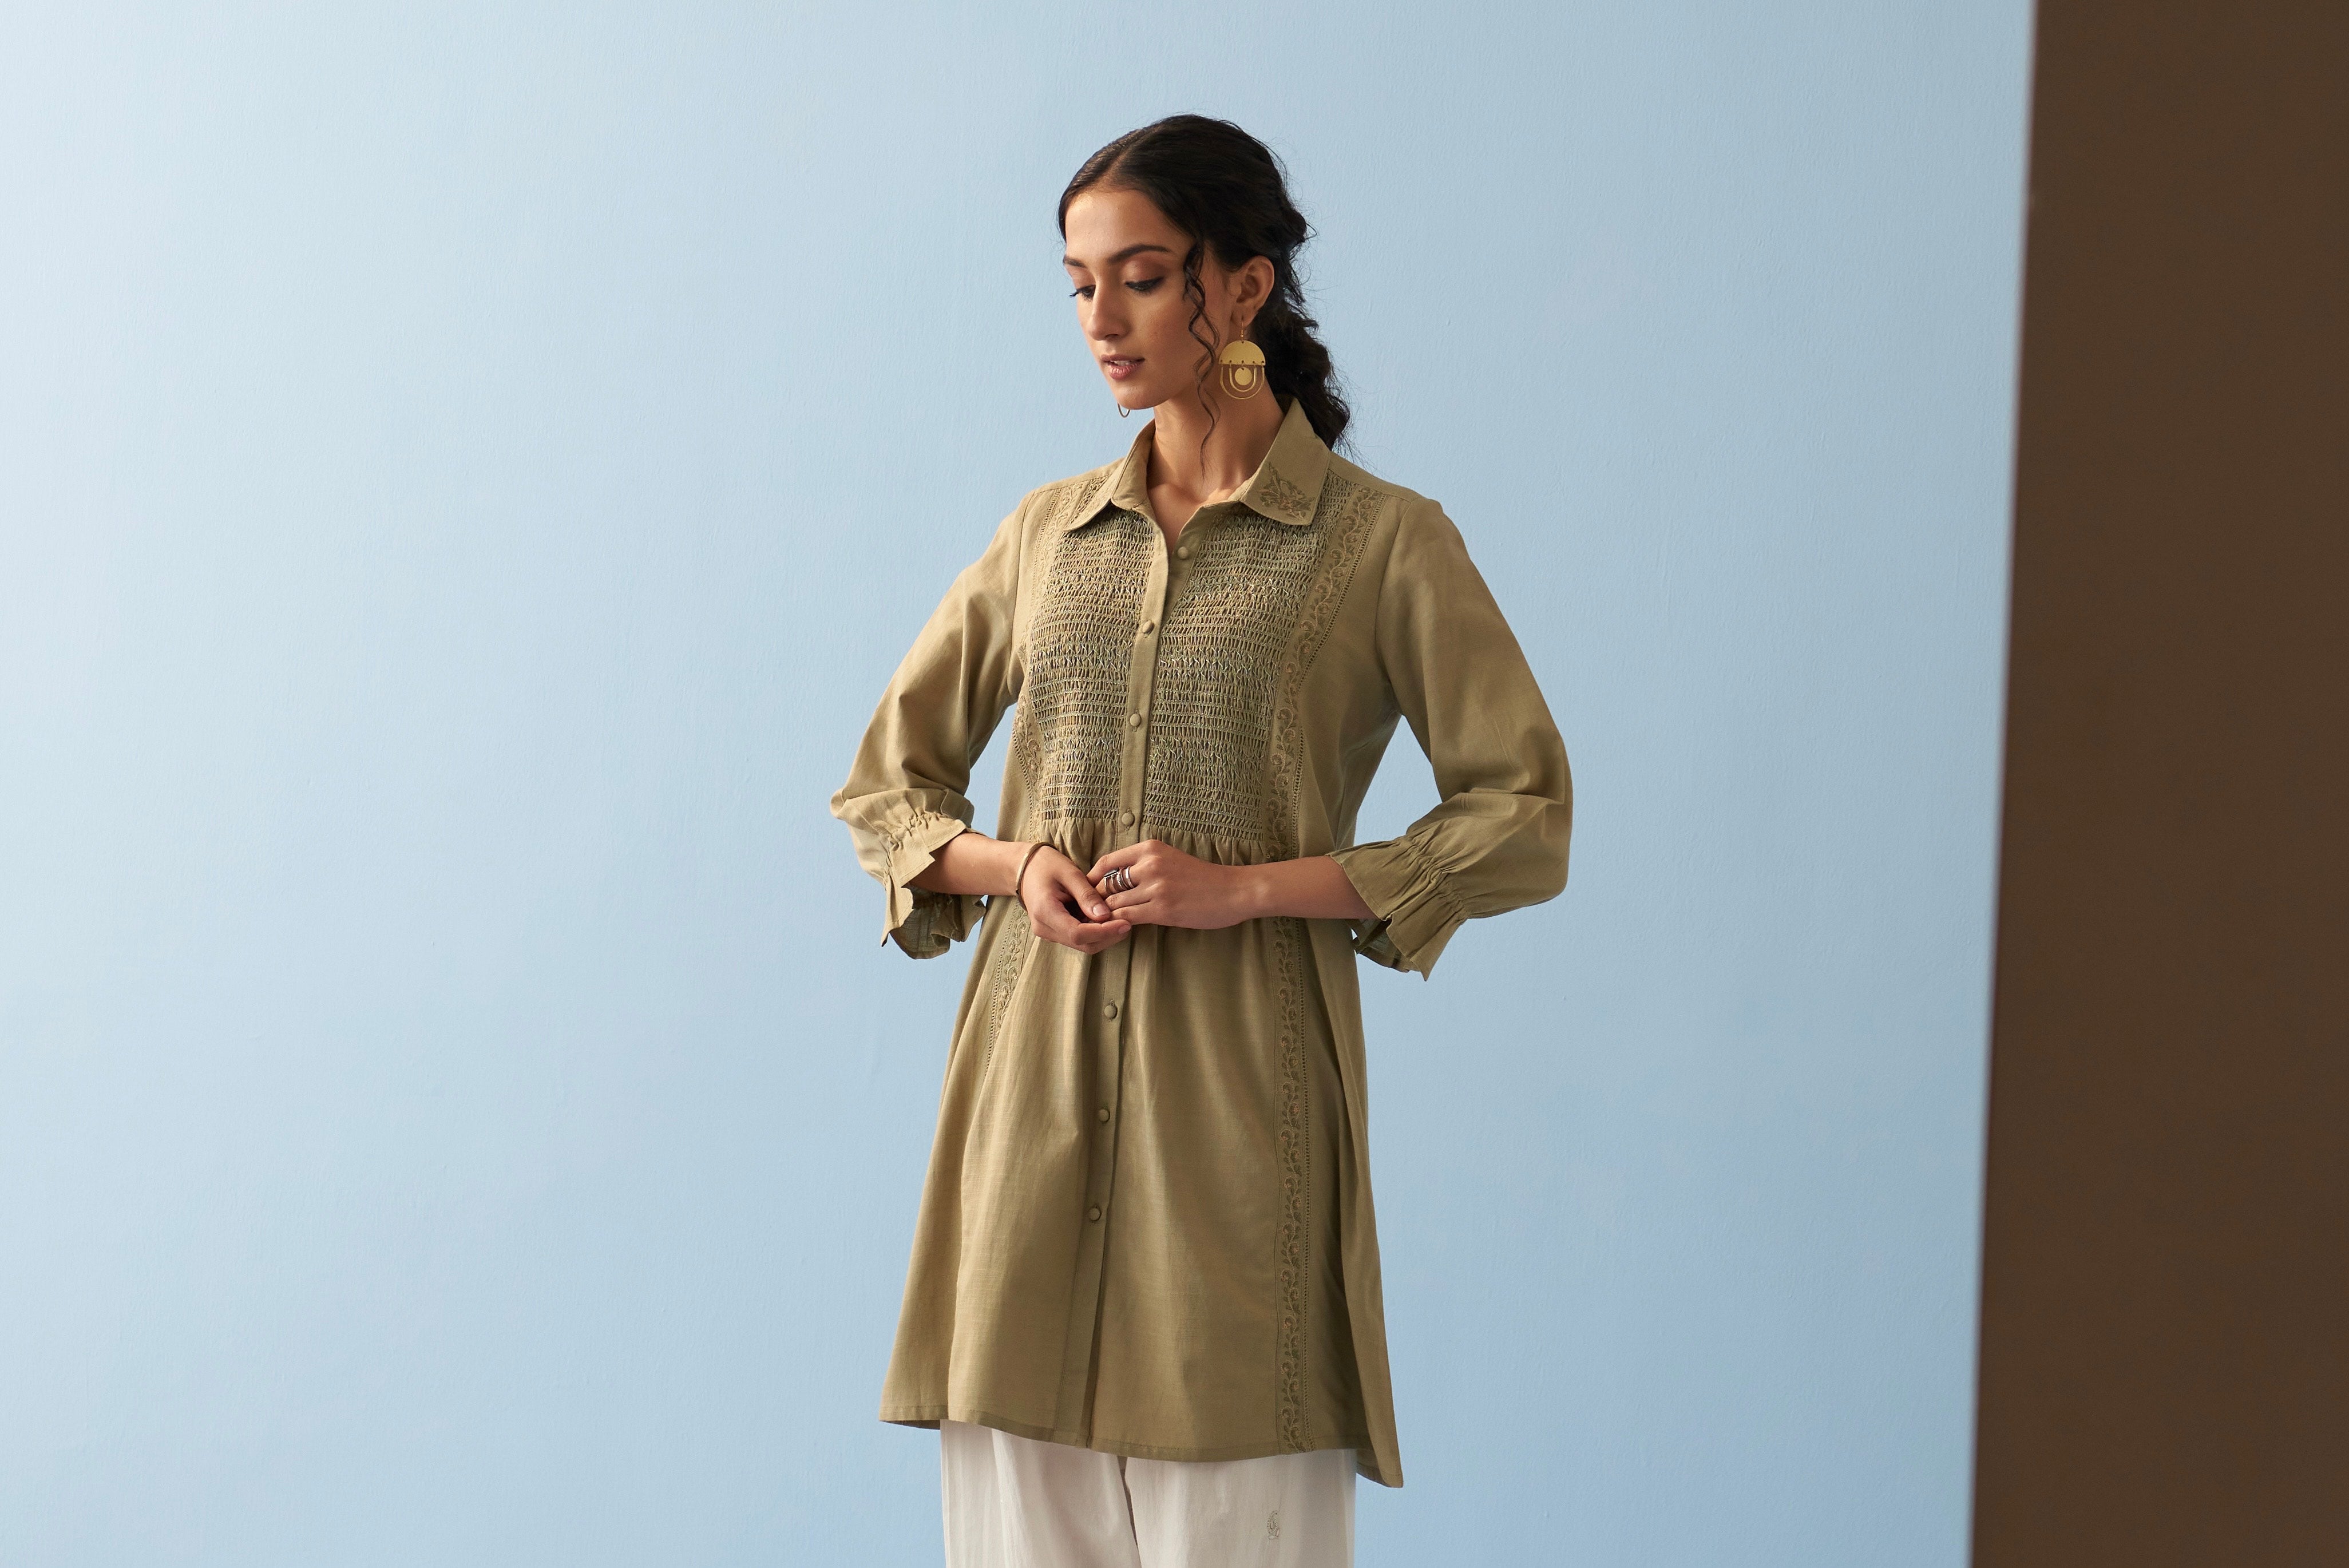 Lakshita’s Guide On How To Get Rain-Ready With Elegance